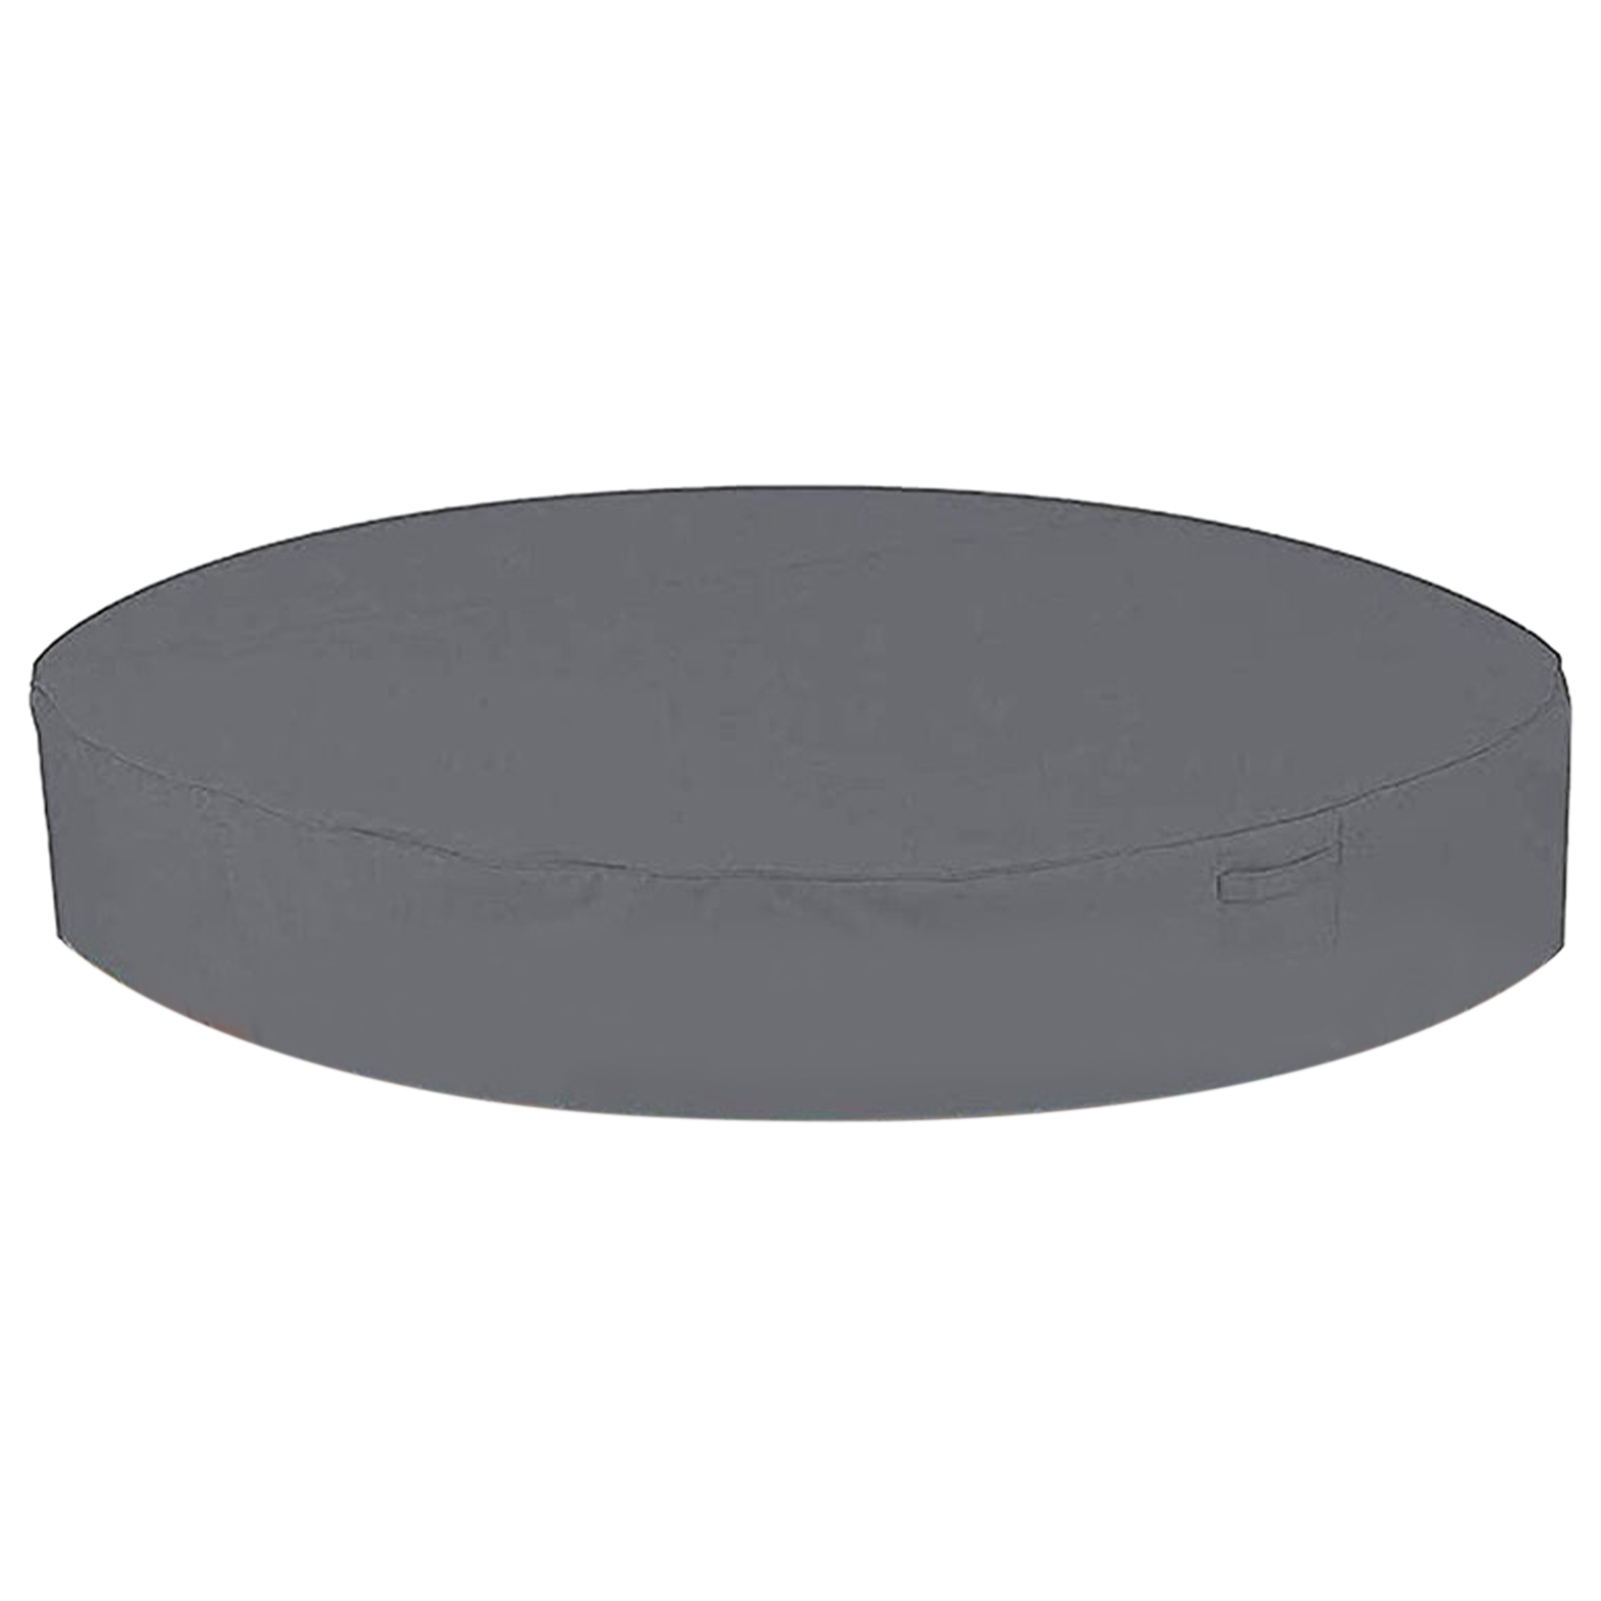 OUTDOOR SPA EASY Clean Hot Tub Cover Round Anti UV Waterproof Moisture